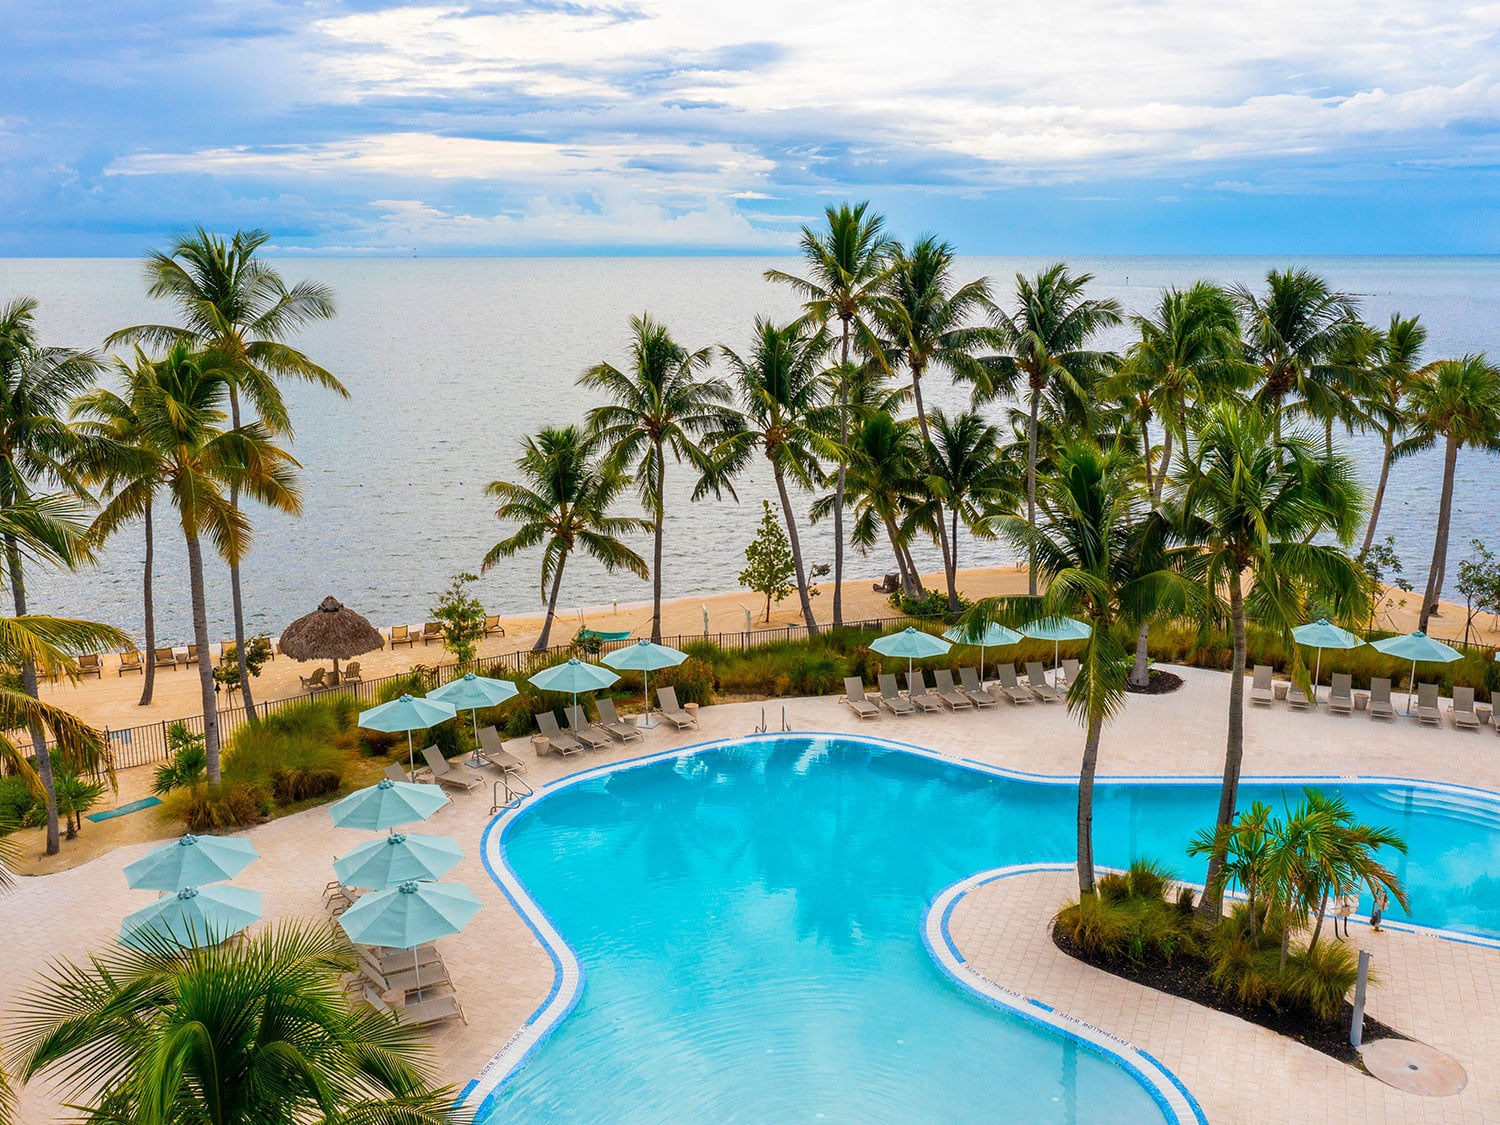 The pool and beach chairs that overlook the adjacent water at Amara Cay Resort in Islamorada, Florida.